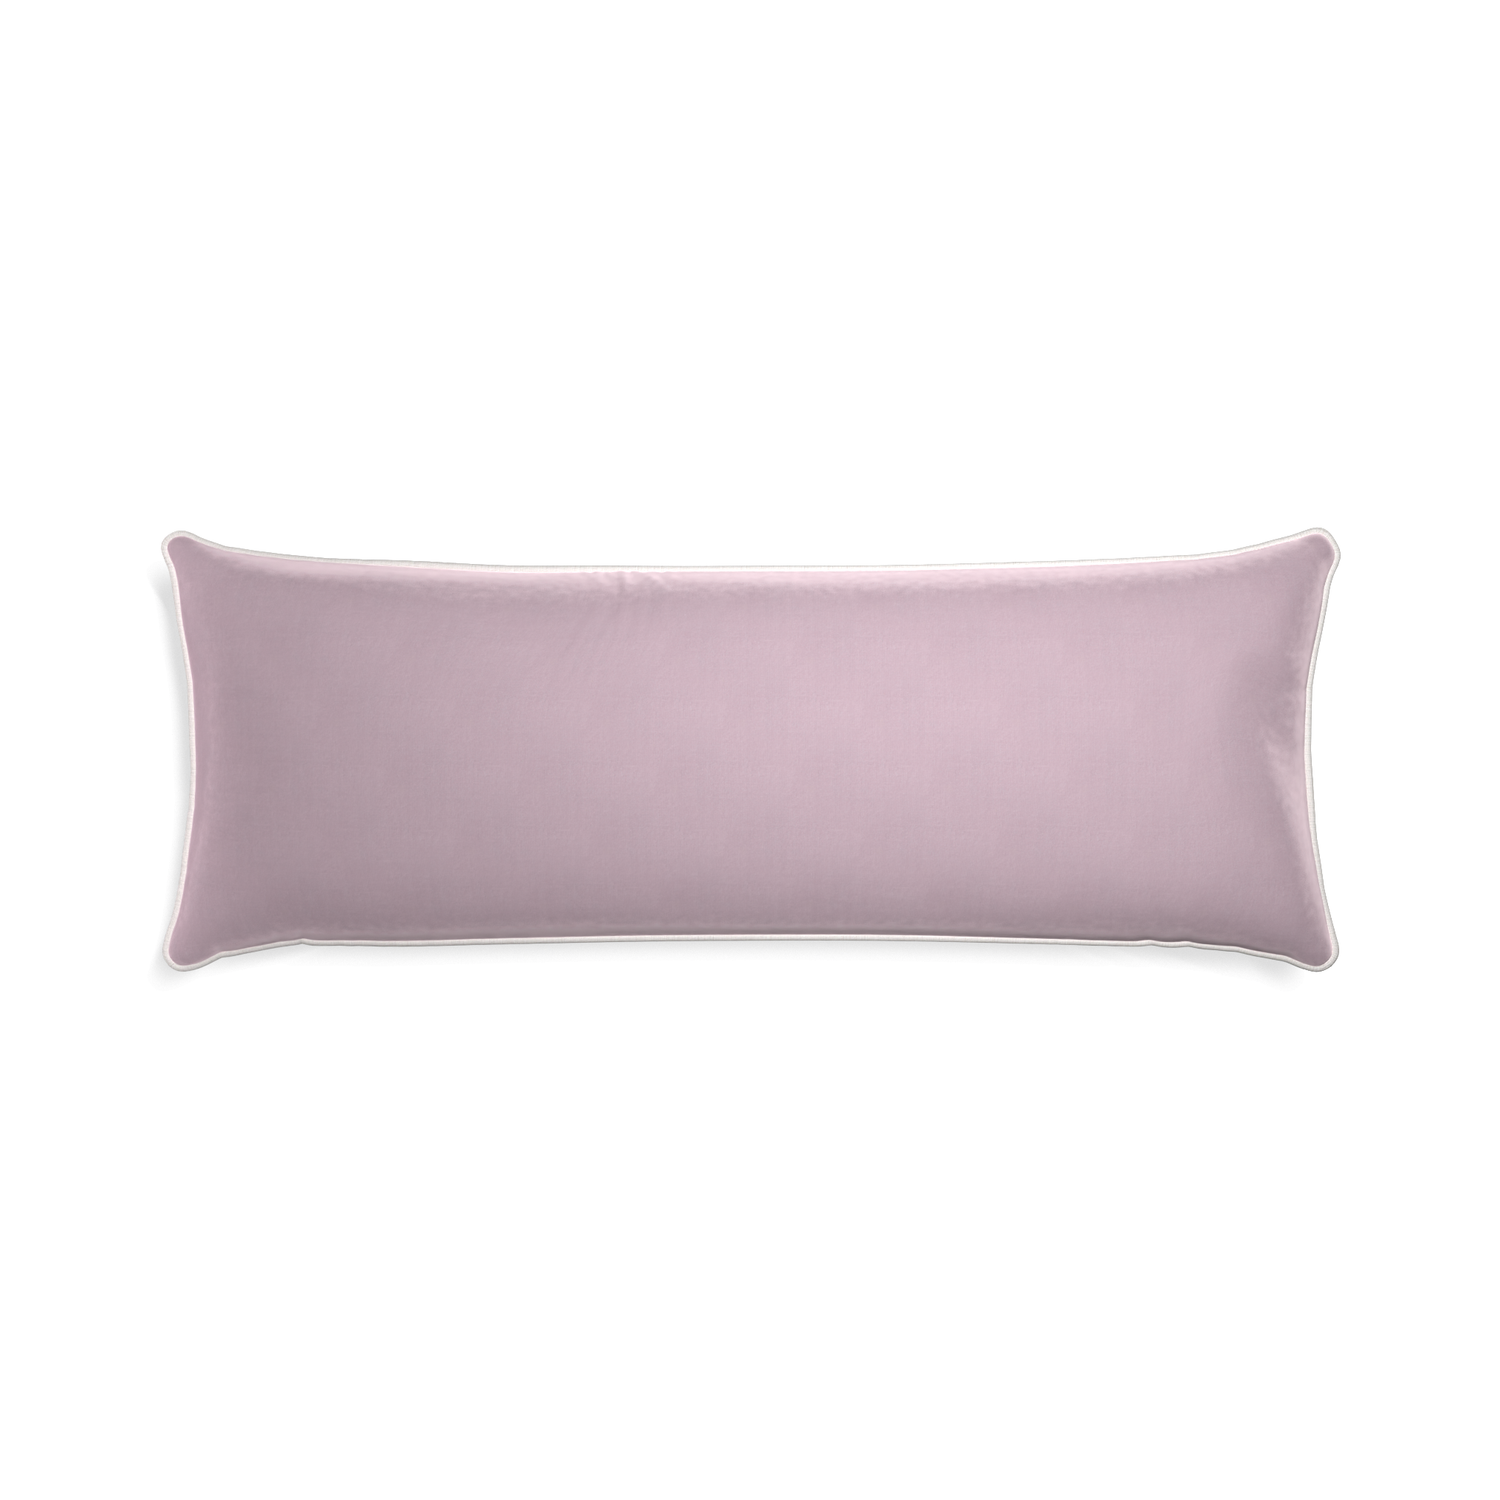 Xl-lumbar lilac velvet custom lilacpillow with snow piping on white background